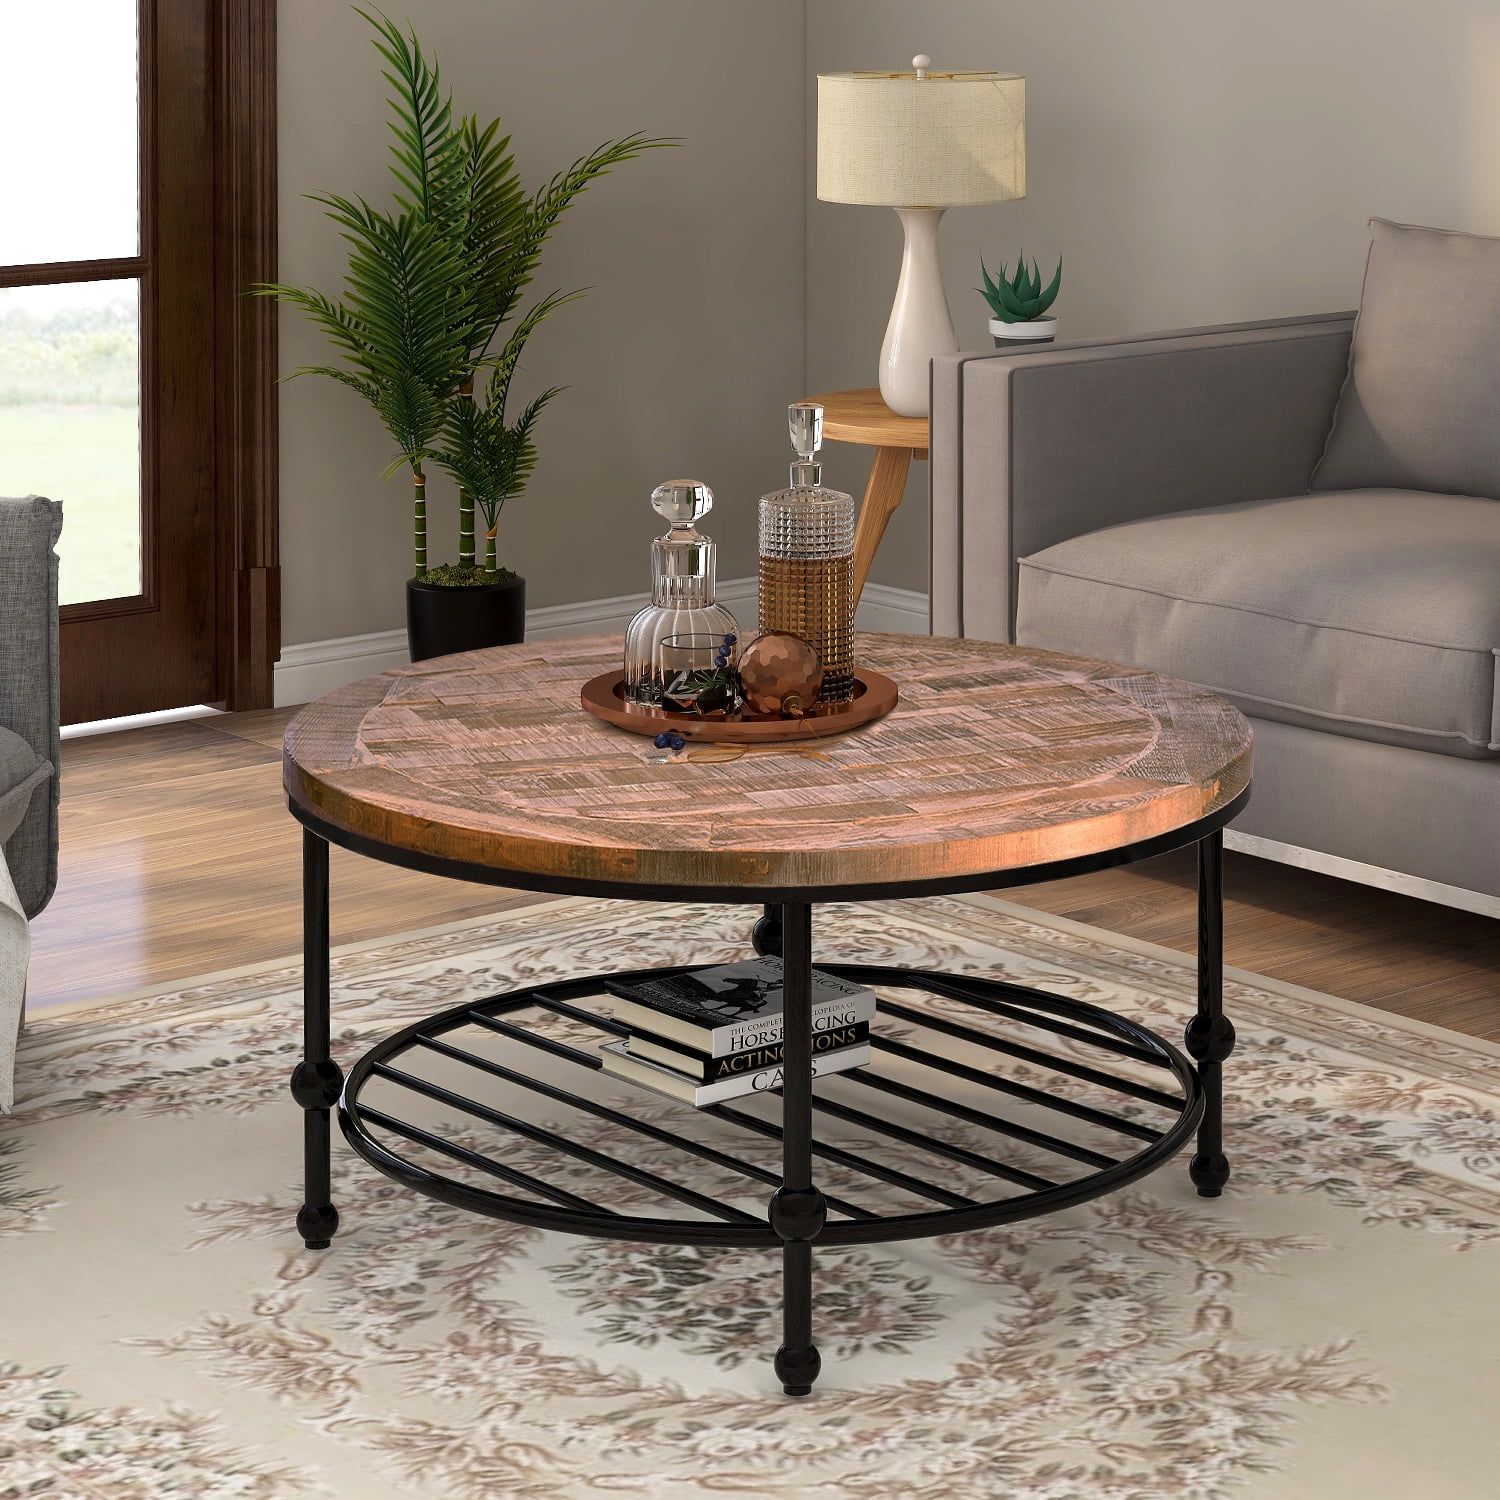 Rustic Natural Round Coffee Table With Storage Shelf For Living Room For Round Coffee Tables (View 7 of 20)